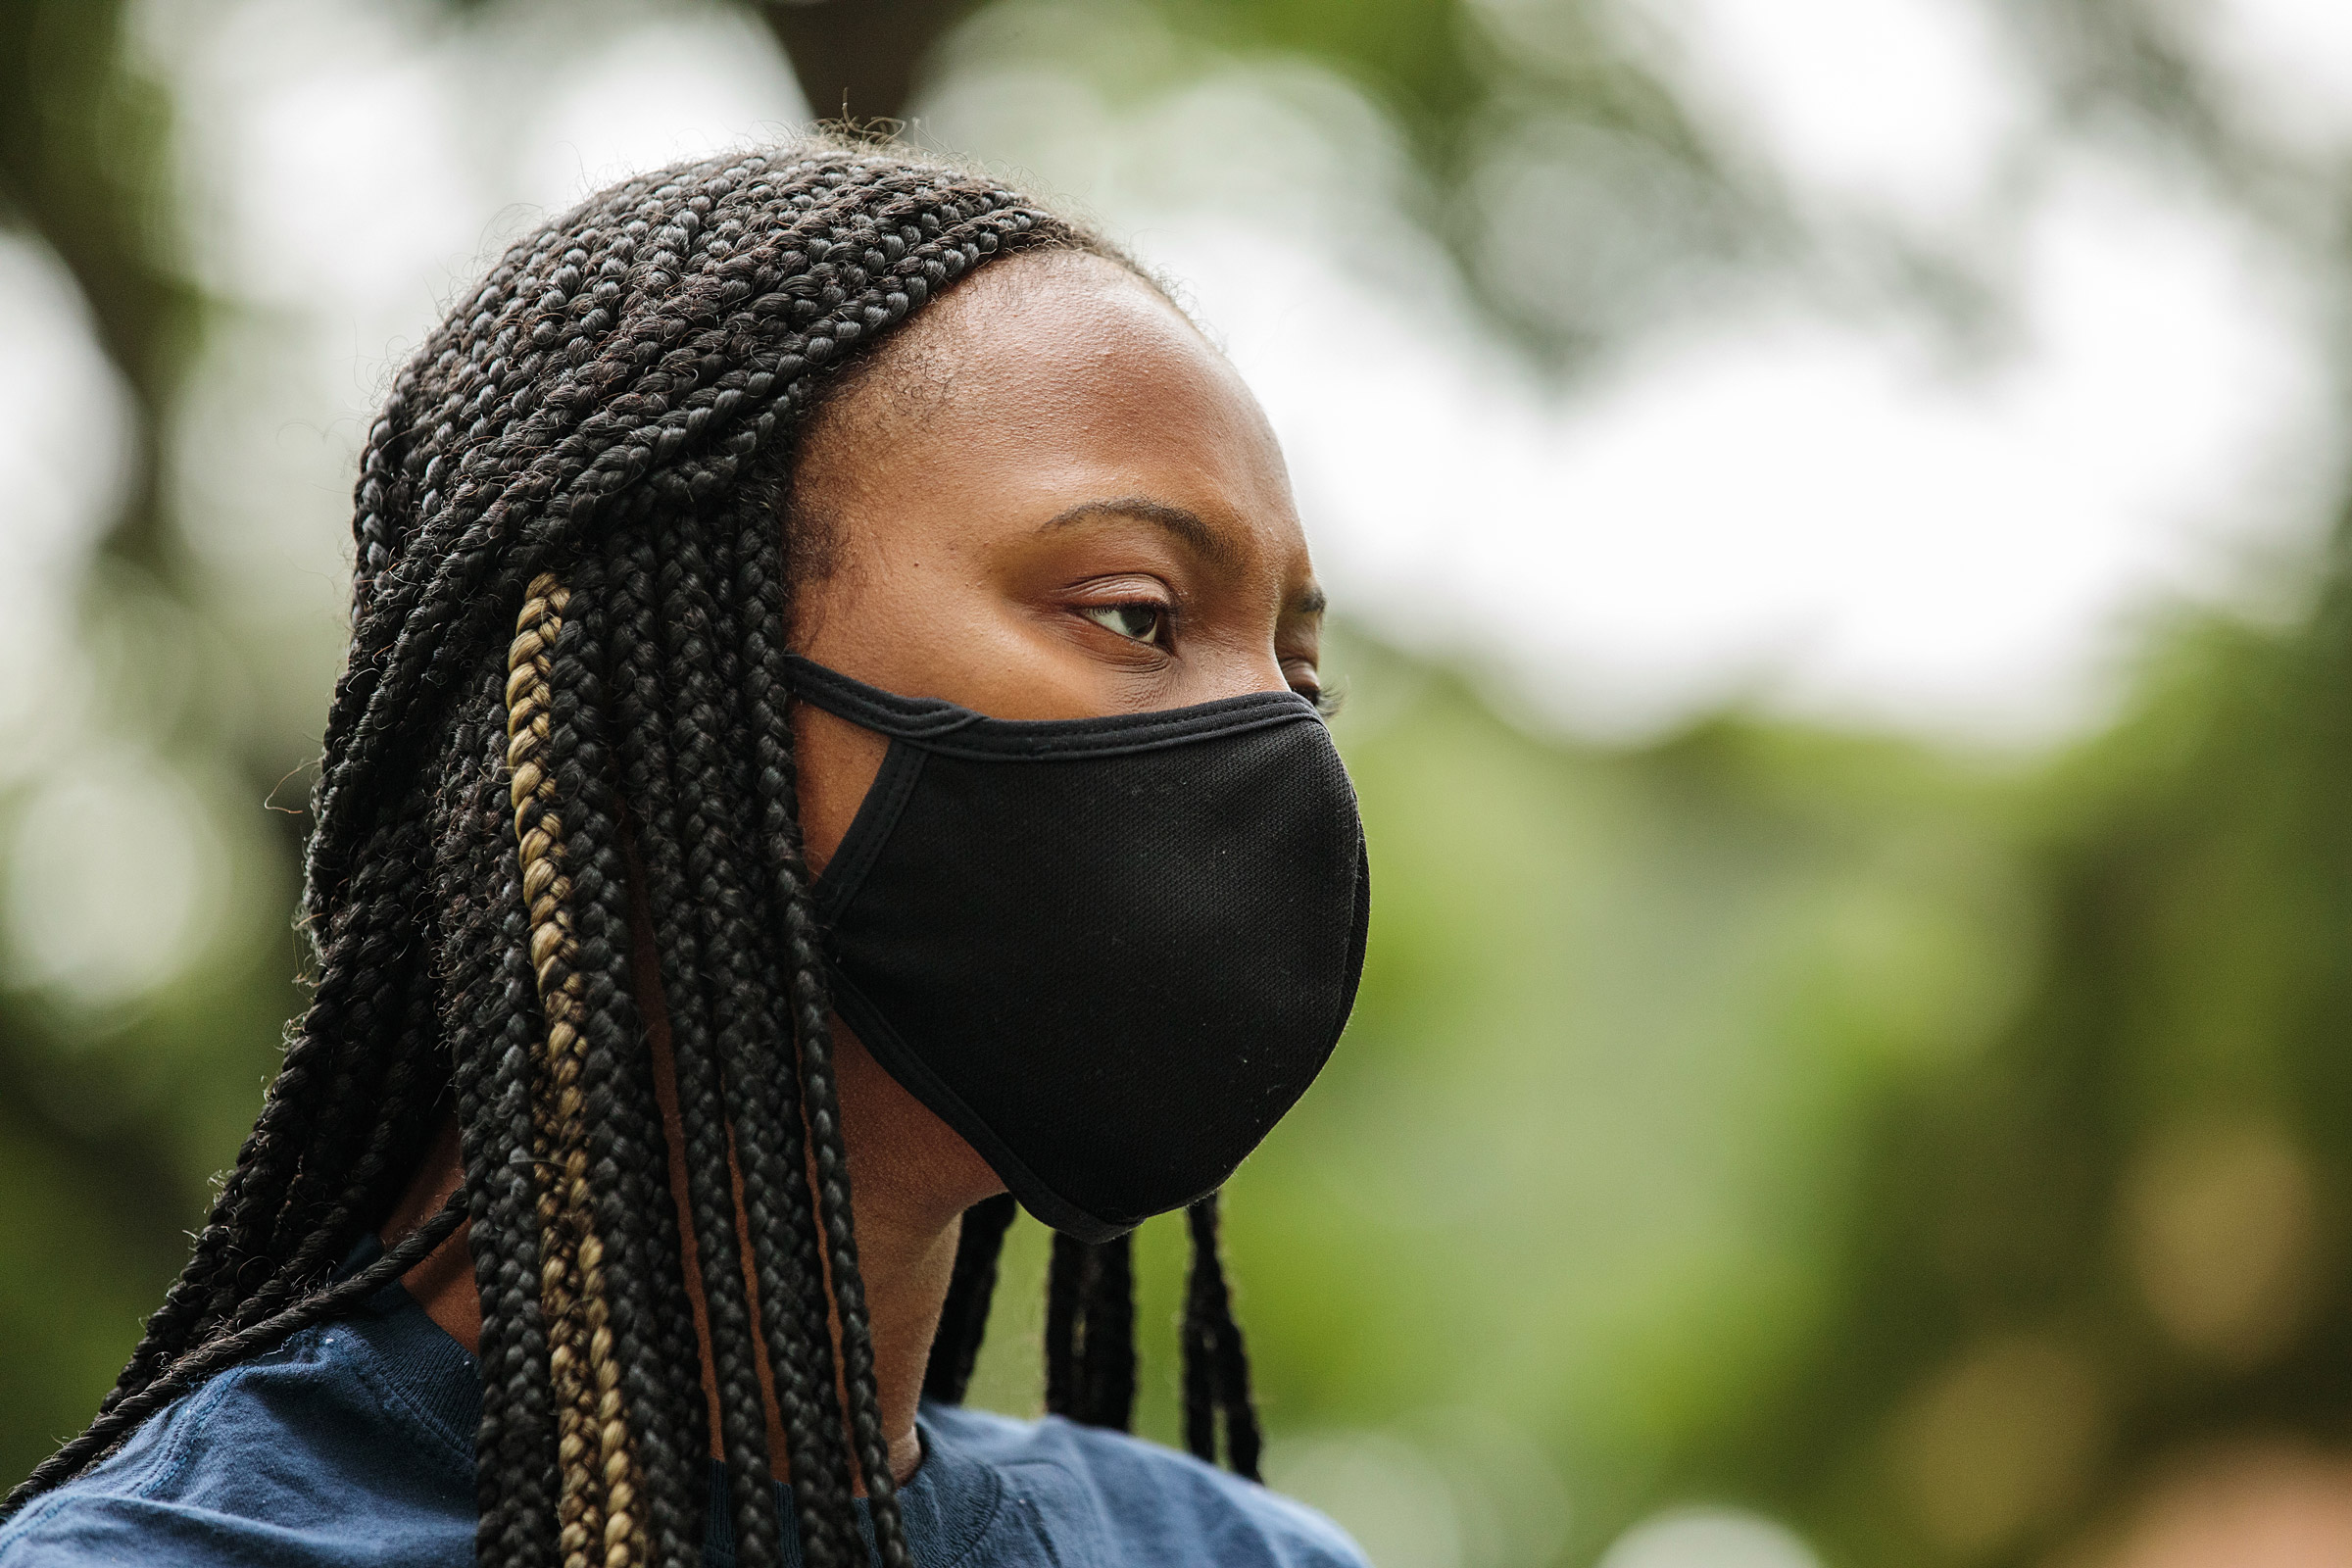 A young woman with braided hair speaks with her mask on